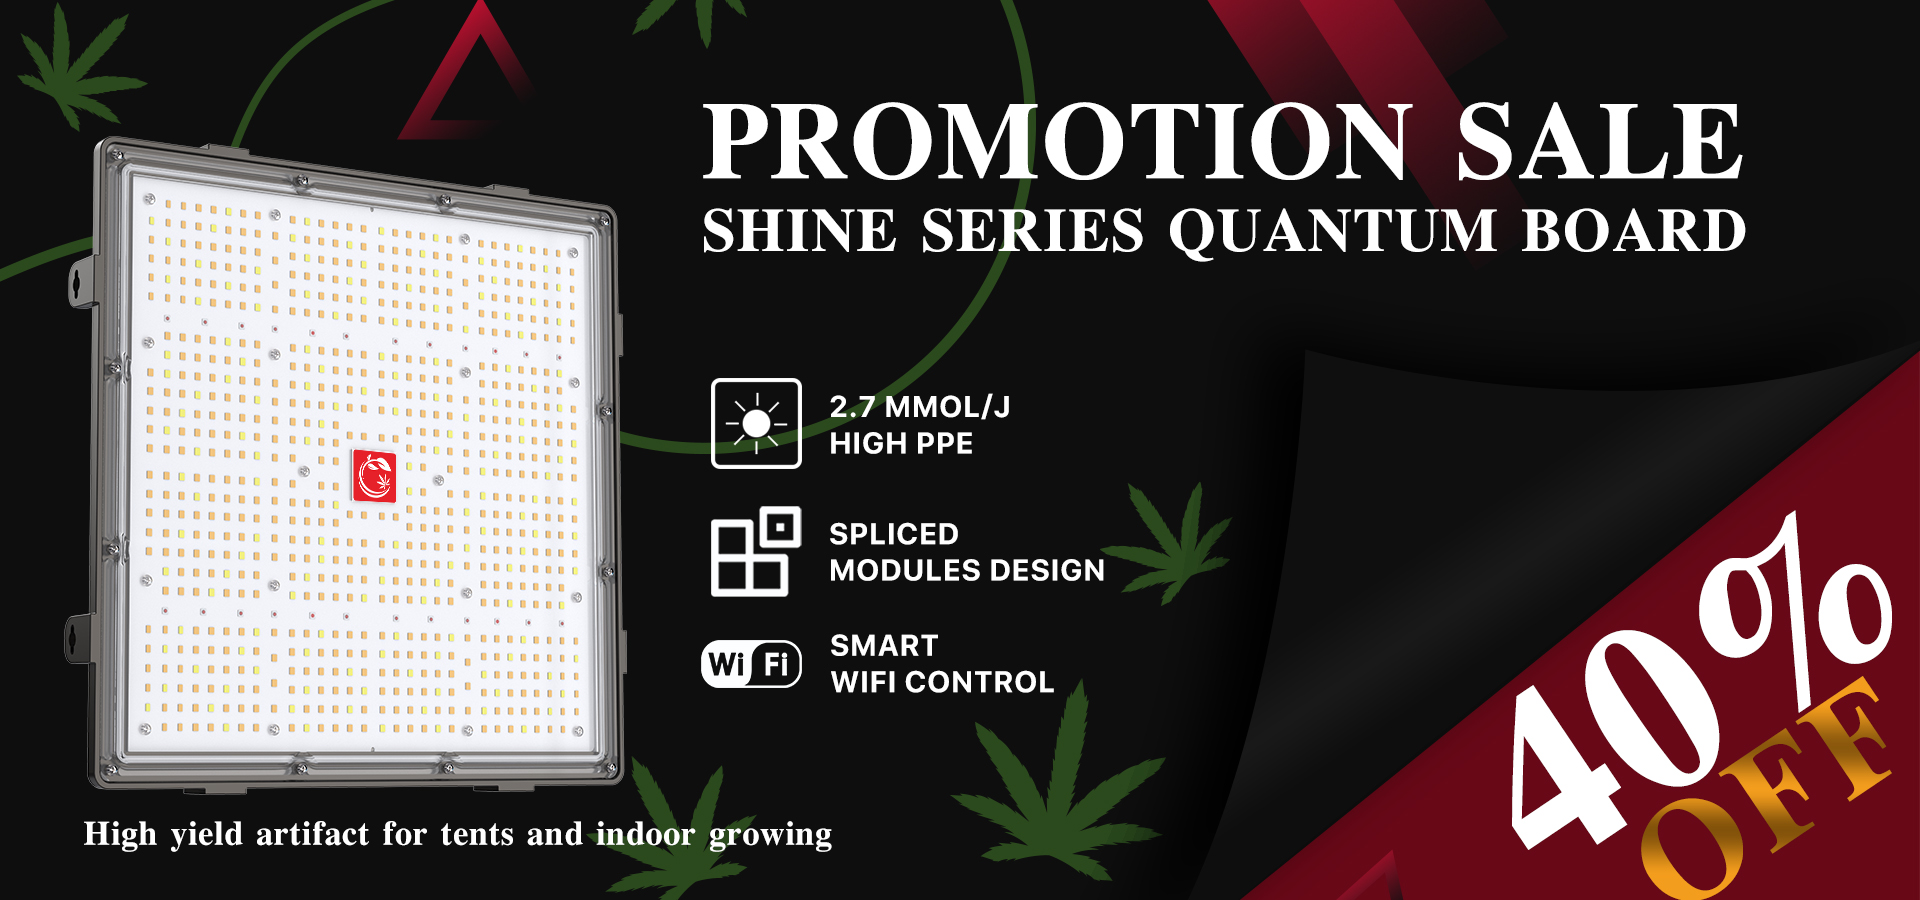 Shine series promotion banner